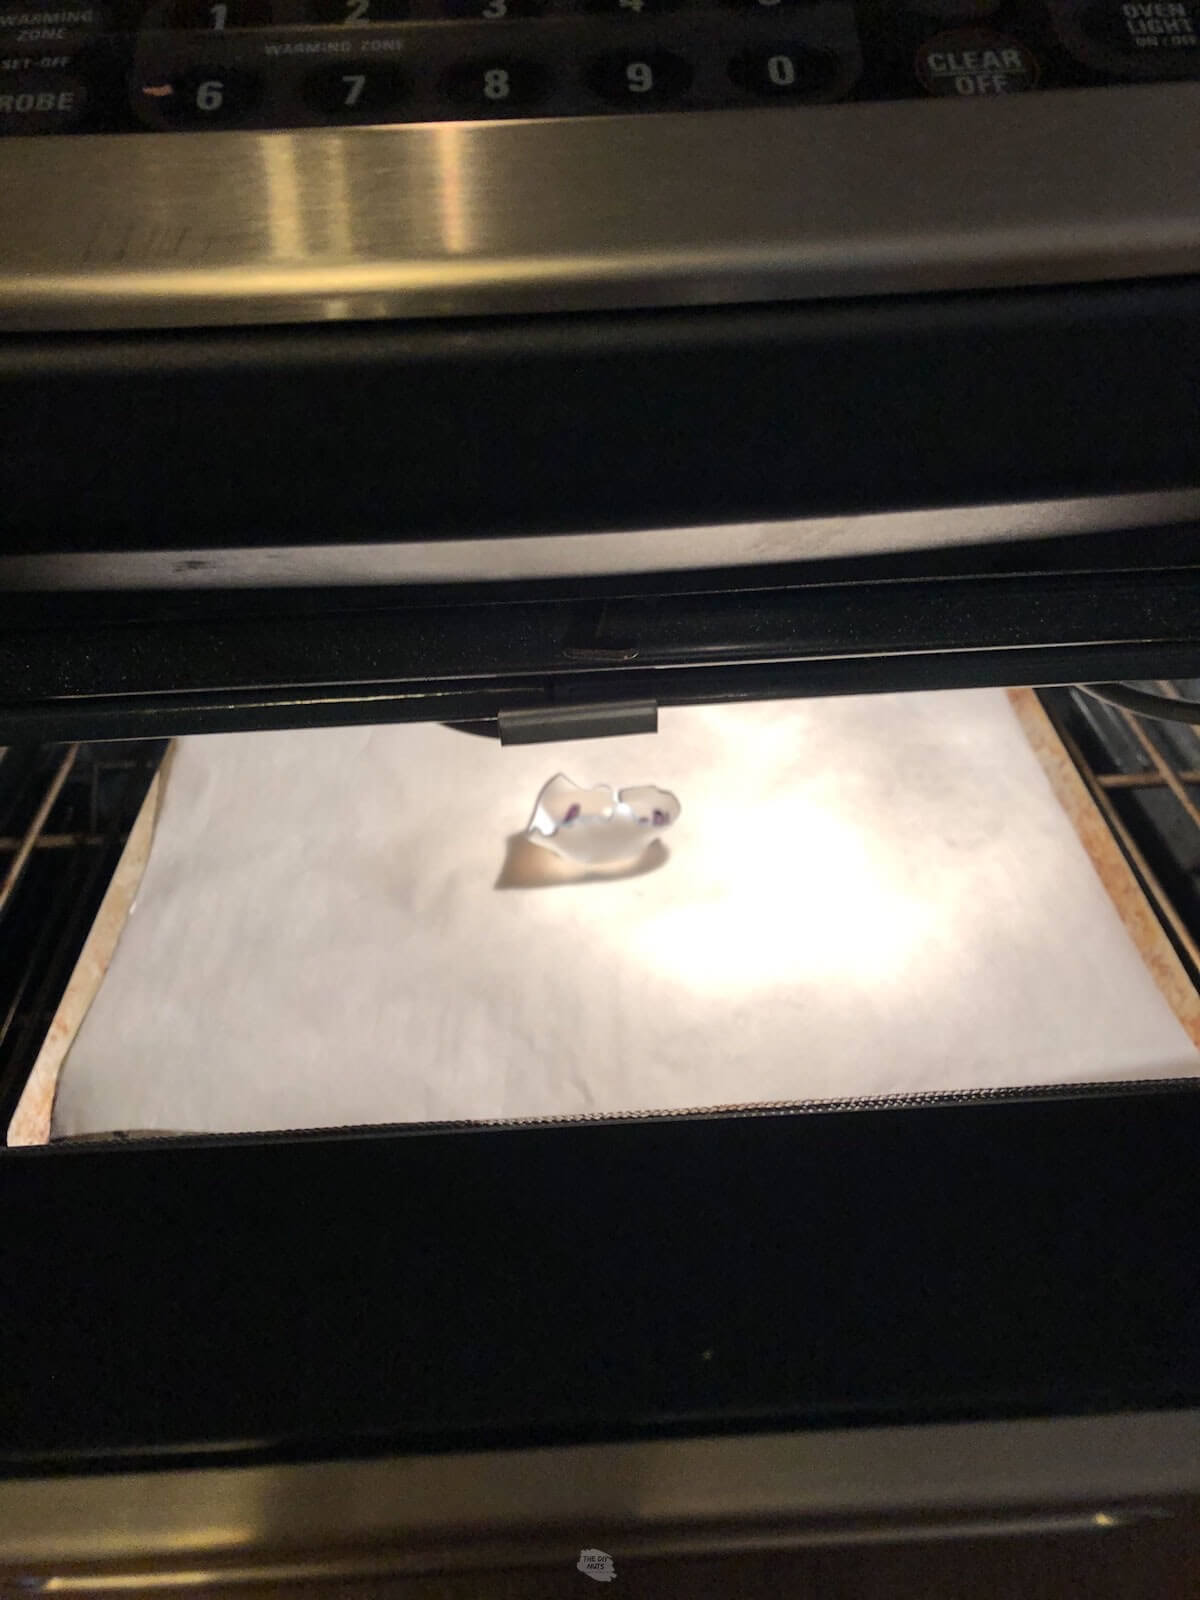 curled up shrinky dink on cookie sheet in oven.